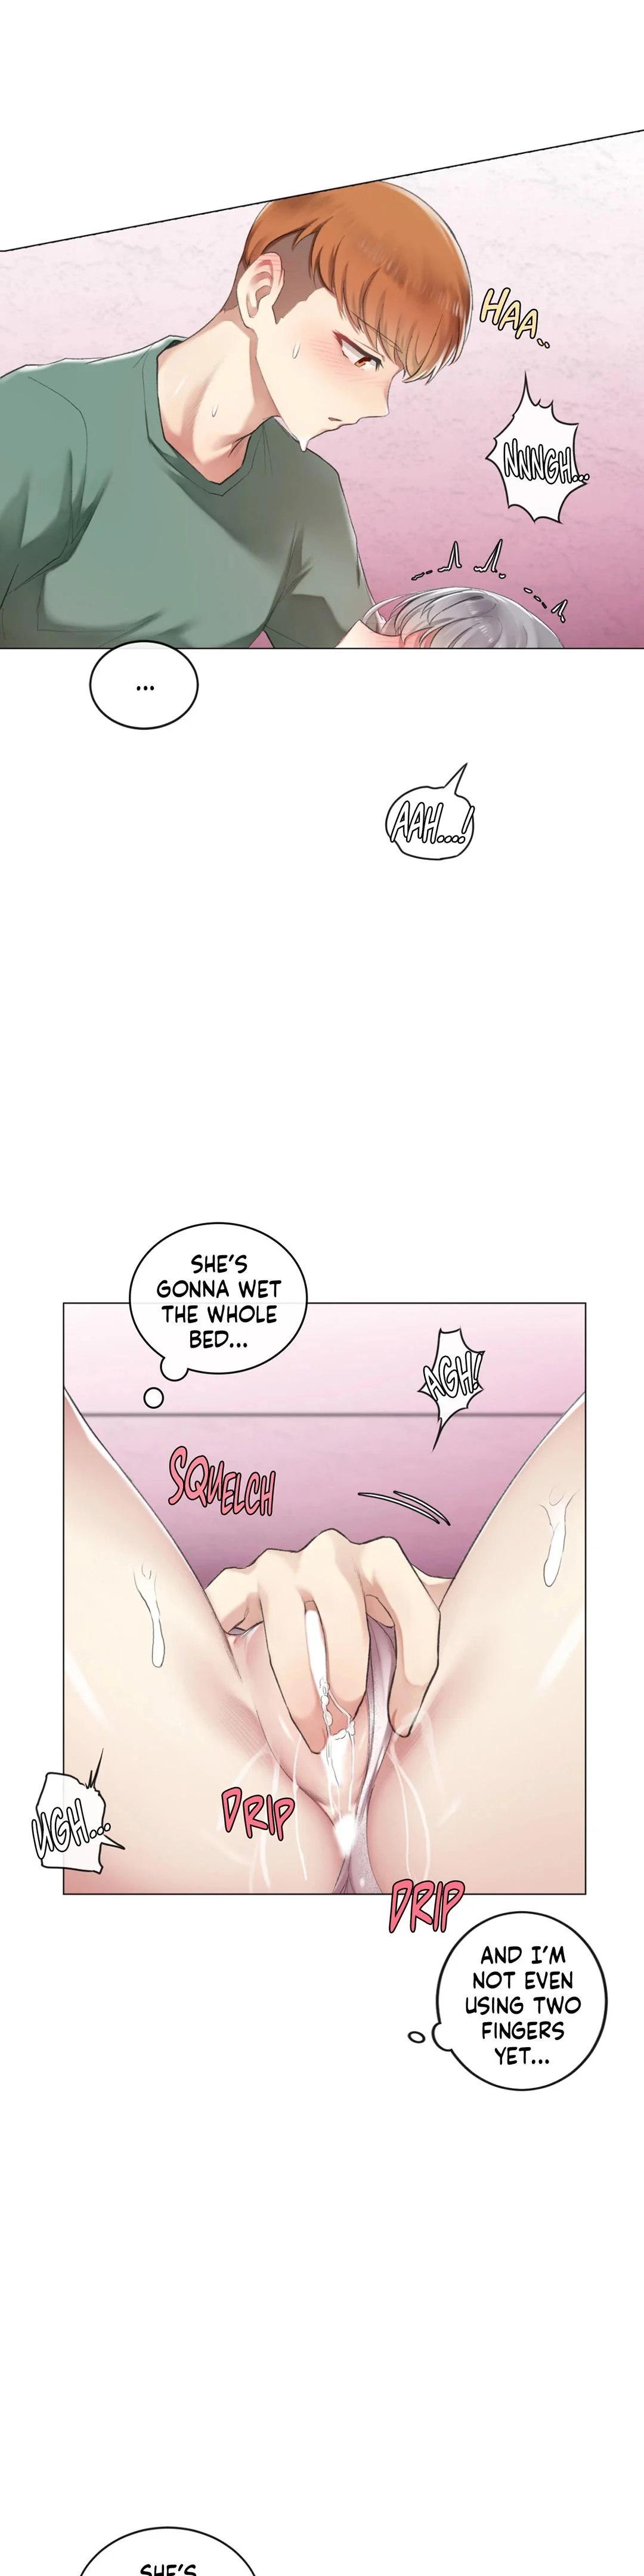 [Dumangoon, KONG_] Sexcape Room: Snap Off Ch.7/7 [English] [Manhwa PDF] Completed 85